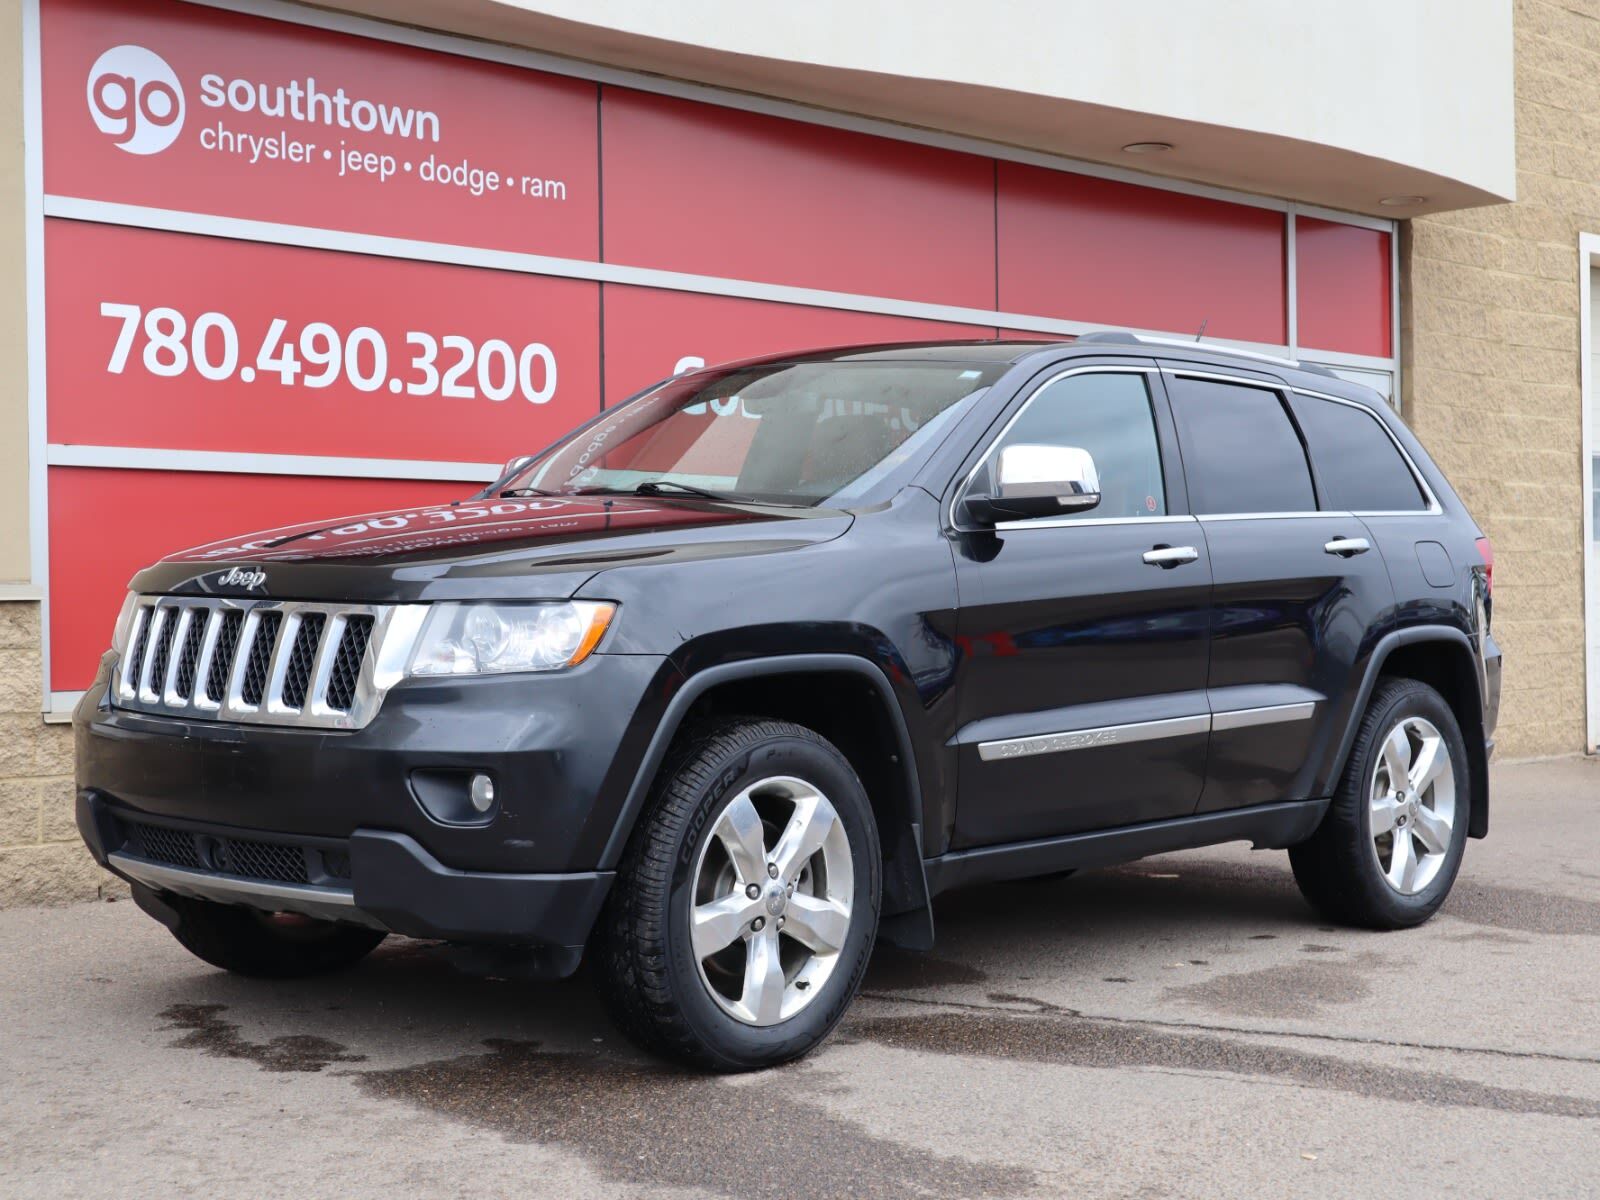 2013 Jeep Grand Cherokee OVERLAND IN BLACK EQUIPPED WITH A 5.7L HEMI V8 , 4